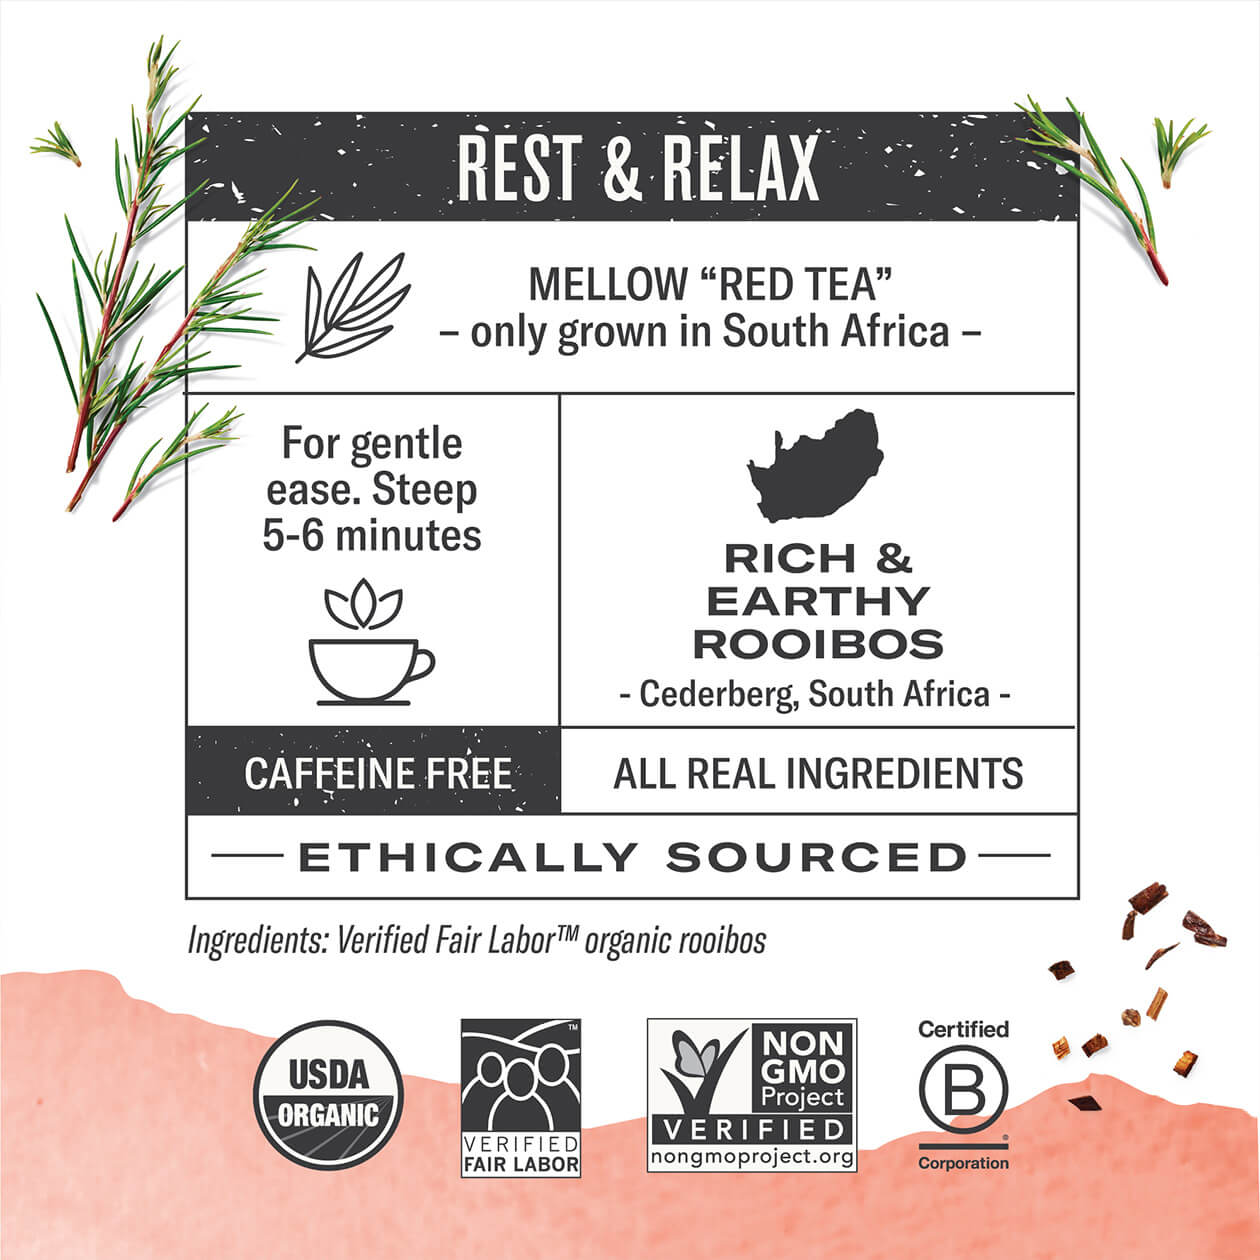 Infographic about Rooibos: steep 5-6 minutes, origin: Cederberg South Africa, caffeine free, all real ingredients, ethically sourced